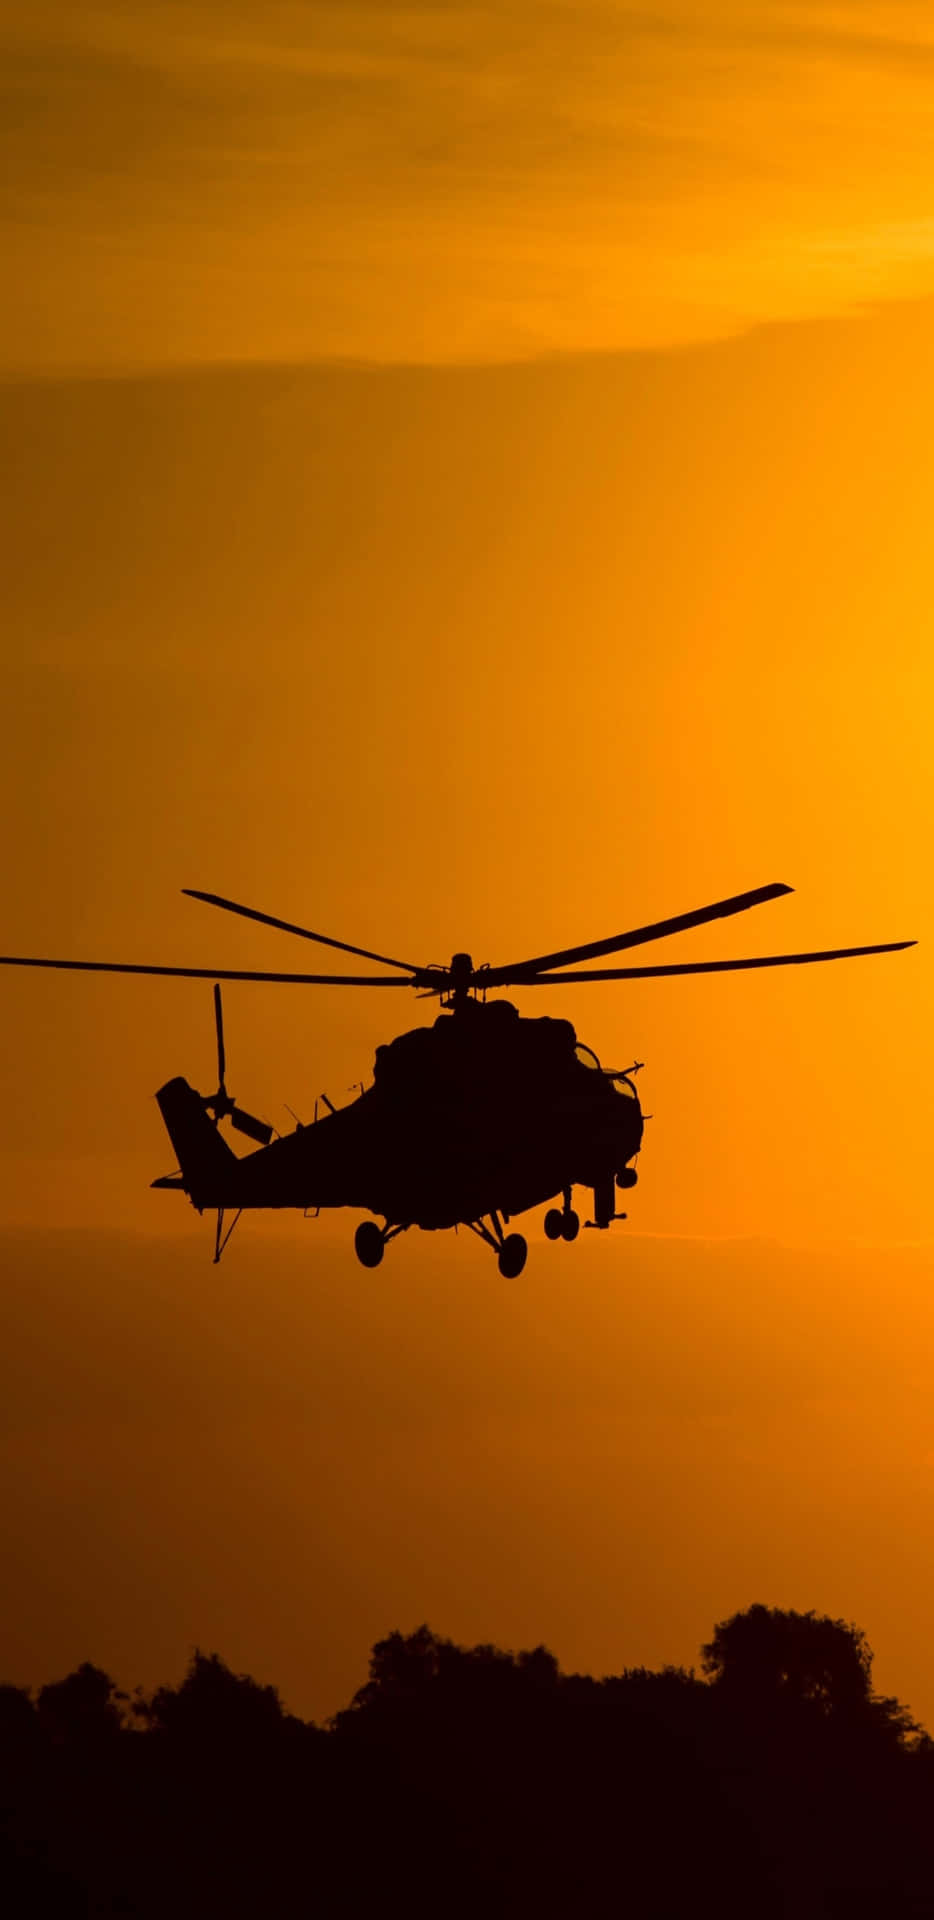 Pixel 3xl Helicopters Background Mil Mi-24 Going To A Sunset